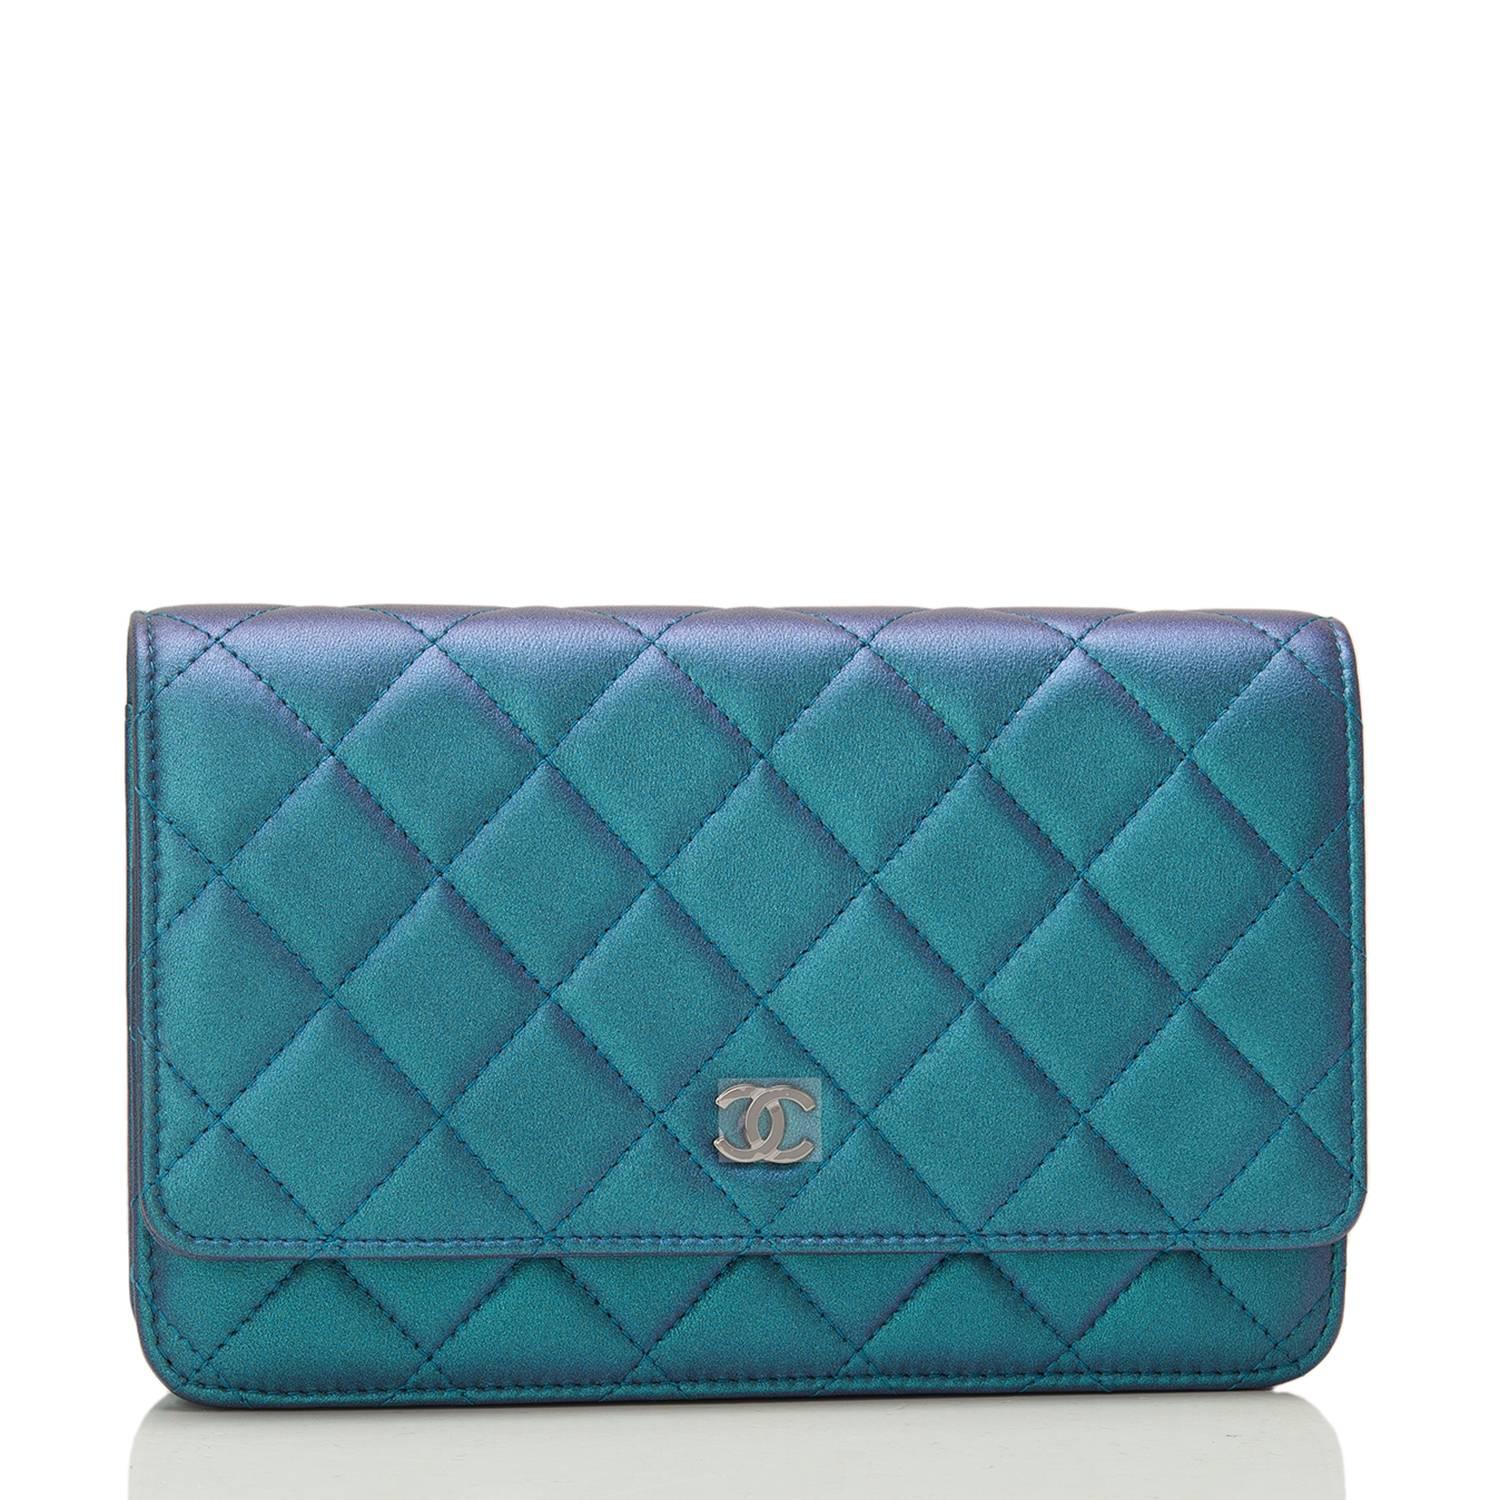 Chanel Classic Wallet on Chain (WOC) of iridescent turquoise lambskin leather with silver tone hardware. 

This Wallet On Chain features signature Chanel quilting, a front flap with CC charm and hidden snap closure, a half moon rear pocket and an